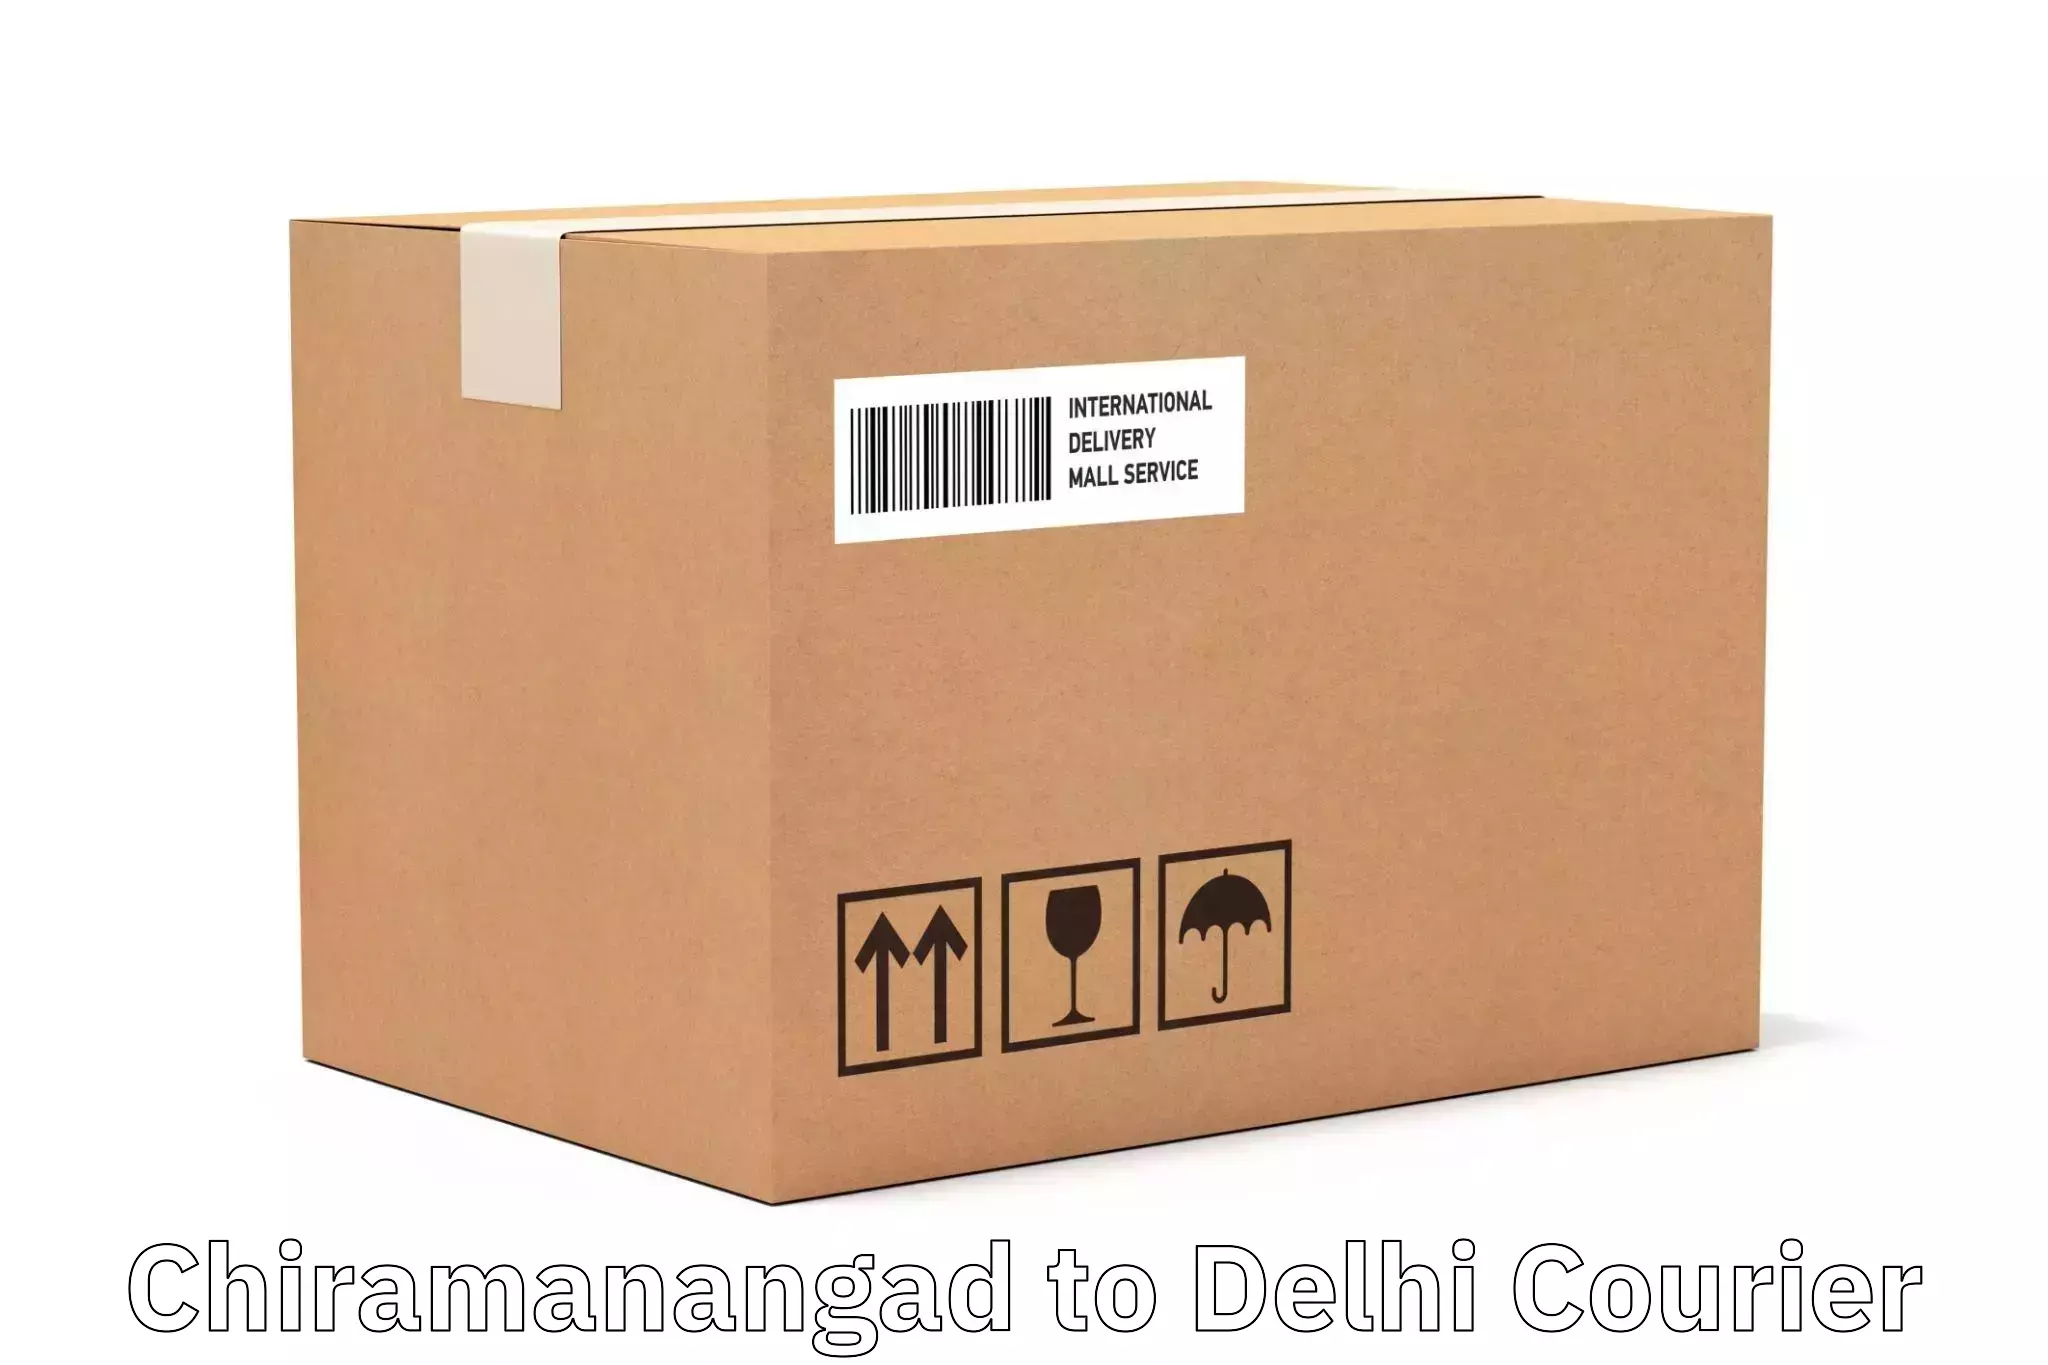 Residential courier service Chiramanangad to Delhi